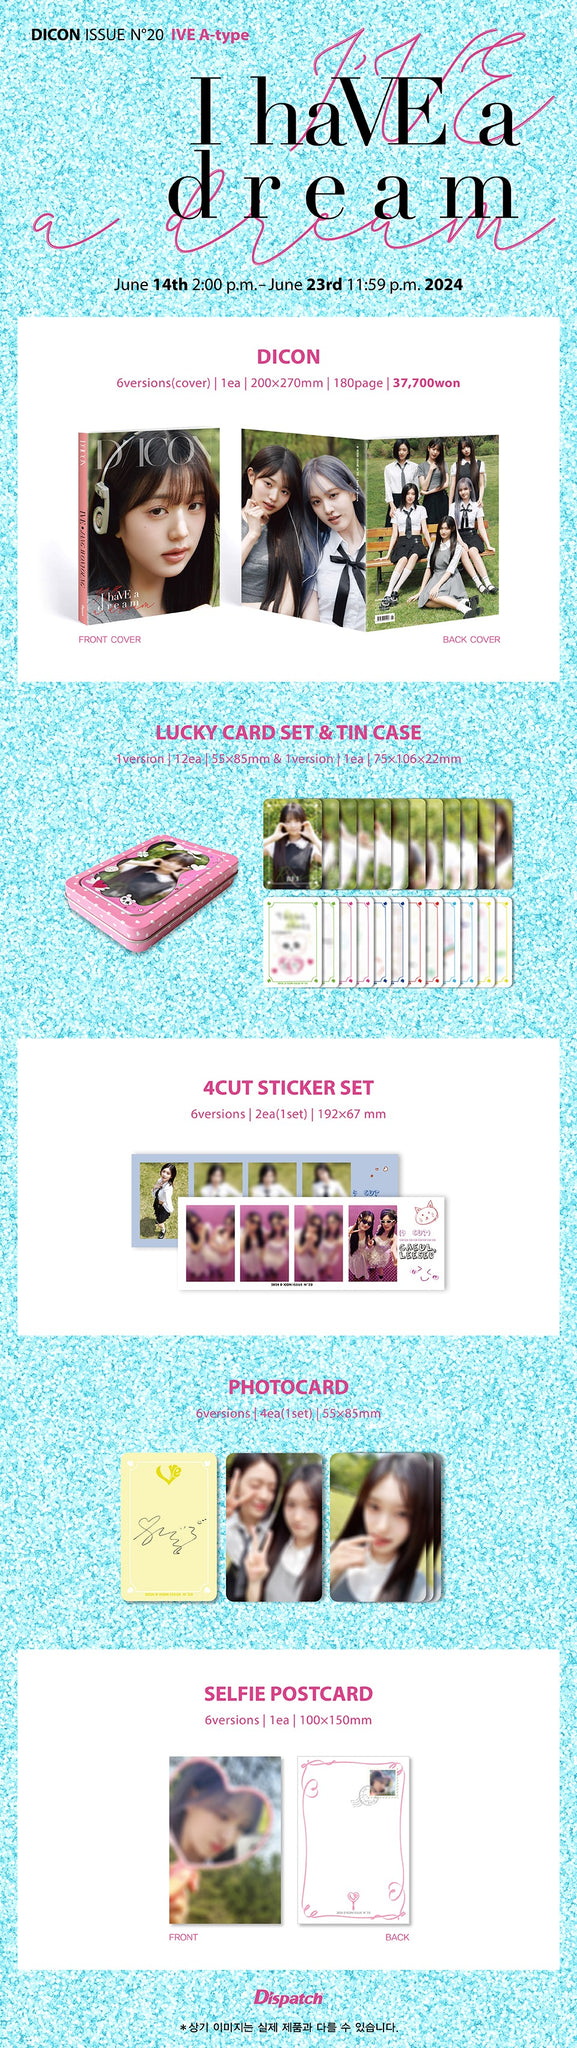 DICON ISSUE N°20 IVE : I haVE a dream, I haVE a fantasy A-type Version Inclusions: Out Box, DICON, Tin Case, Lucky Card Set, 4Cut Sticker Set, Photocard Set, Selfie Postcard